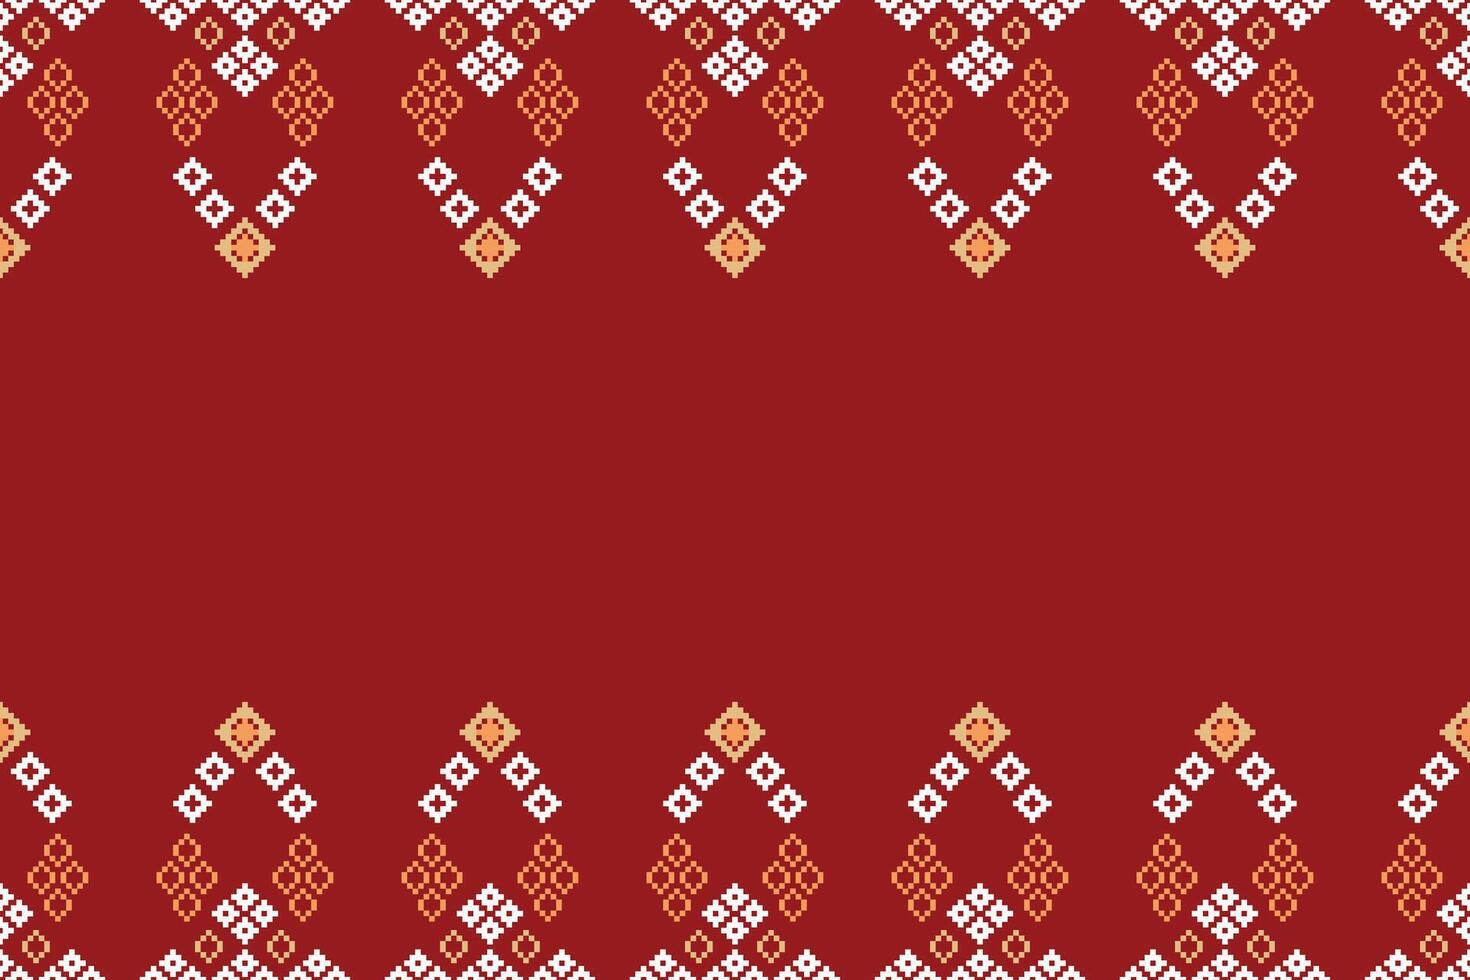 Traditional ethnic motifs ikat geometric fabric pattern cross stitch.Ikat embroidery Ethnic oriental Pixel red background. Abstract,illustration. Texture,christmas,decoration,wallpaper. vector